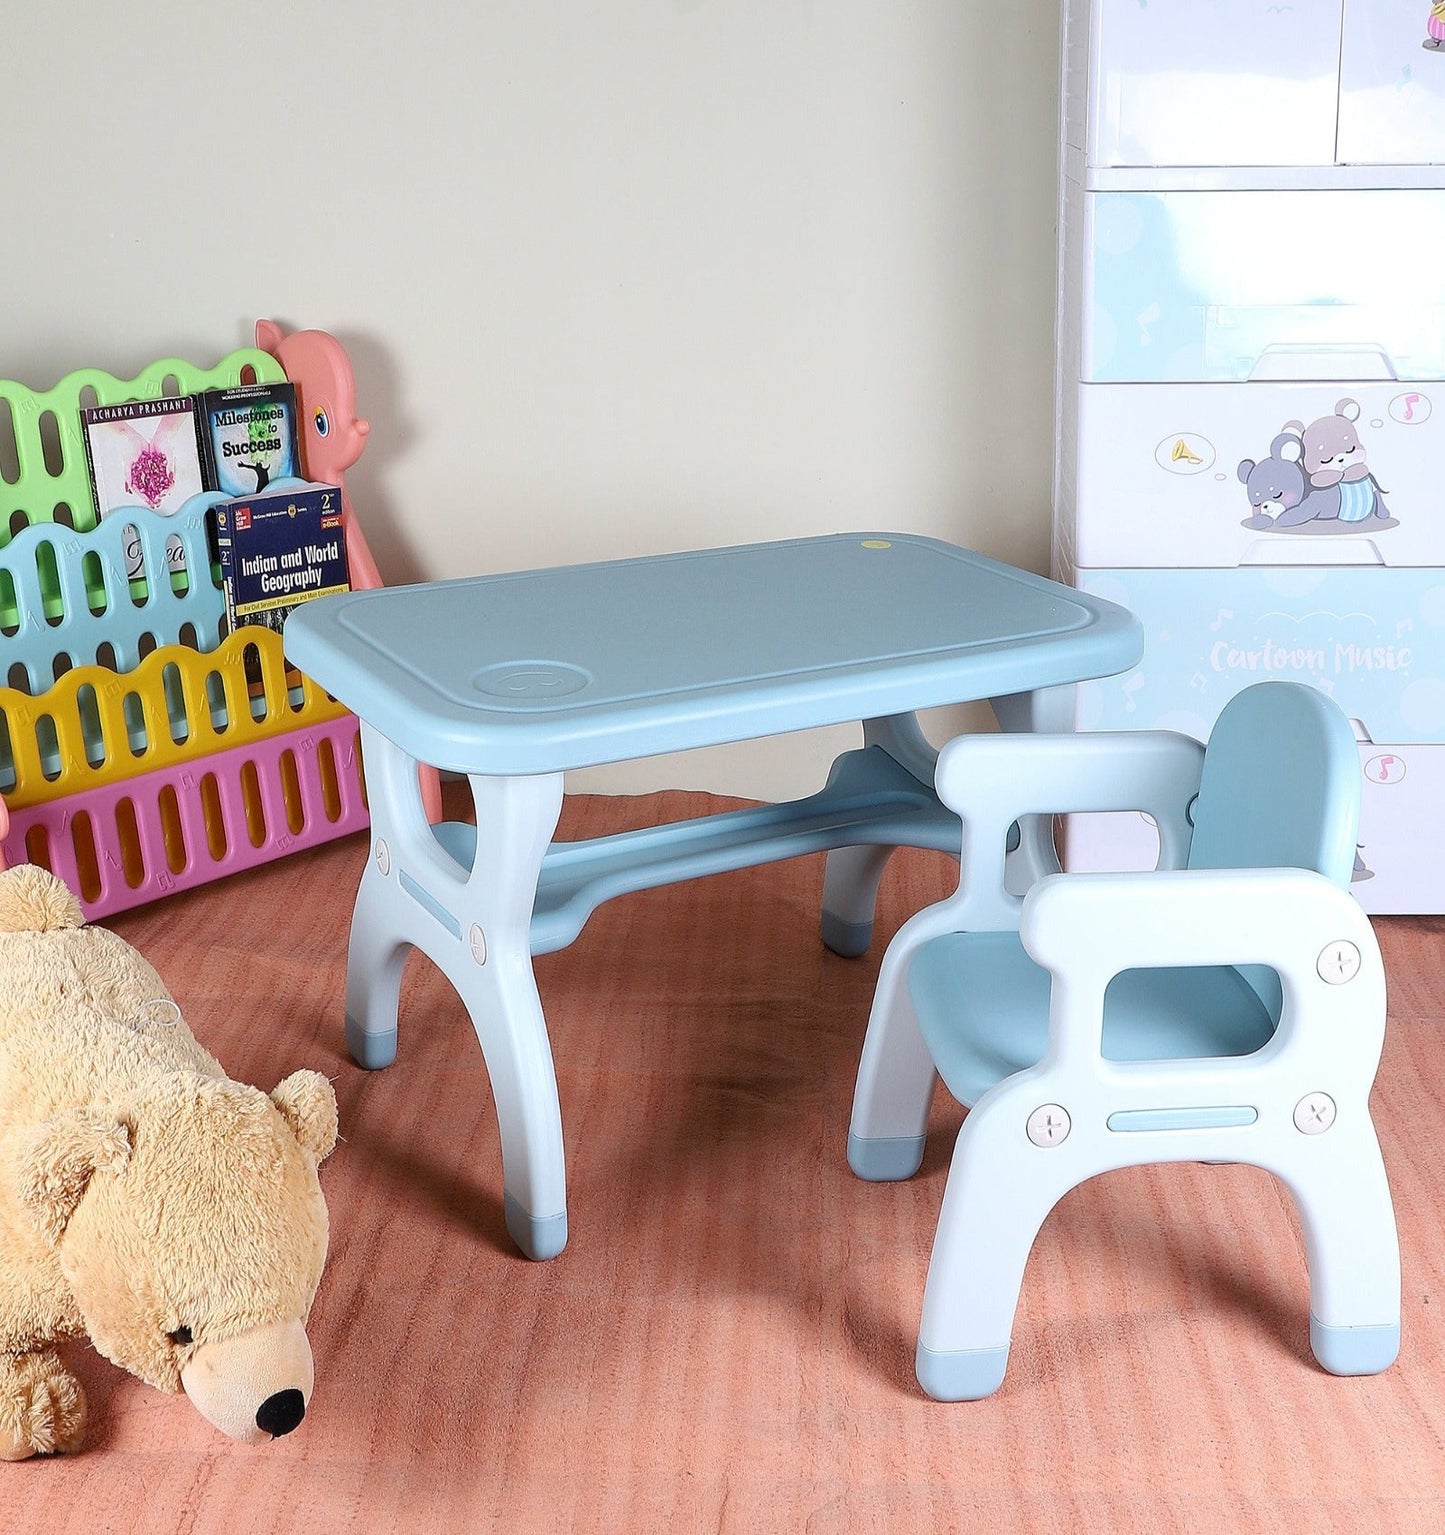 Table Chair with Storage Blue